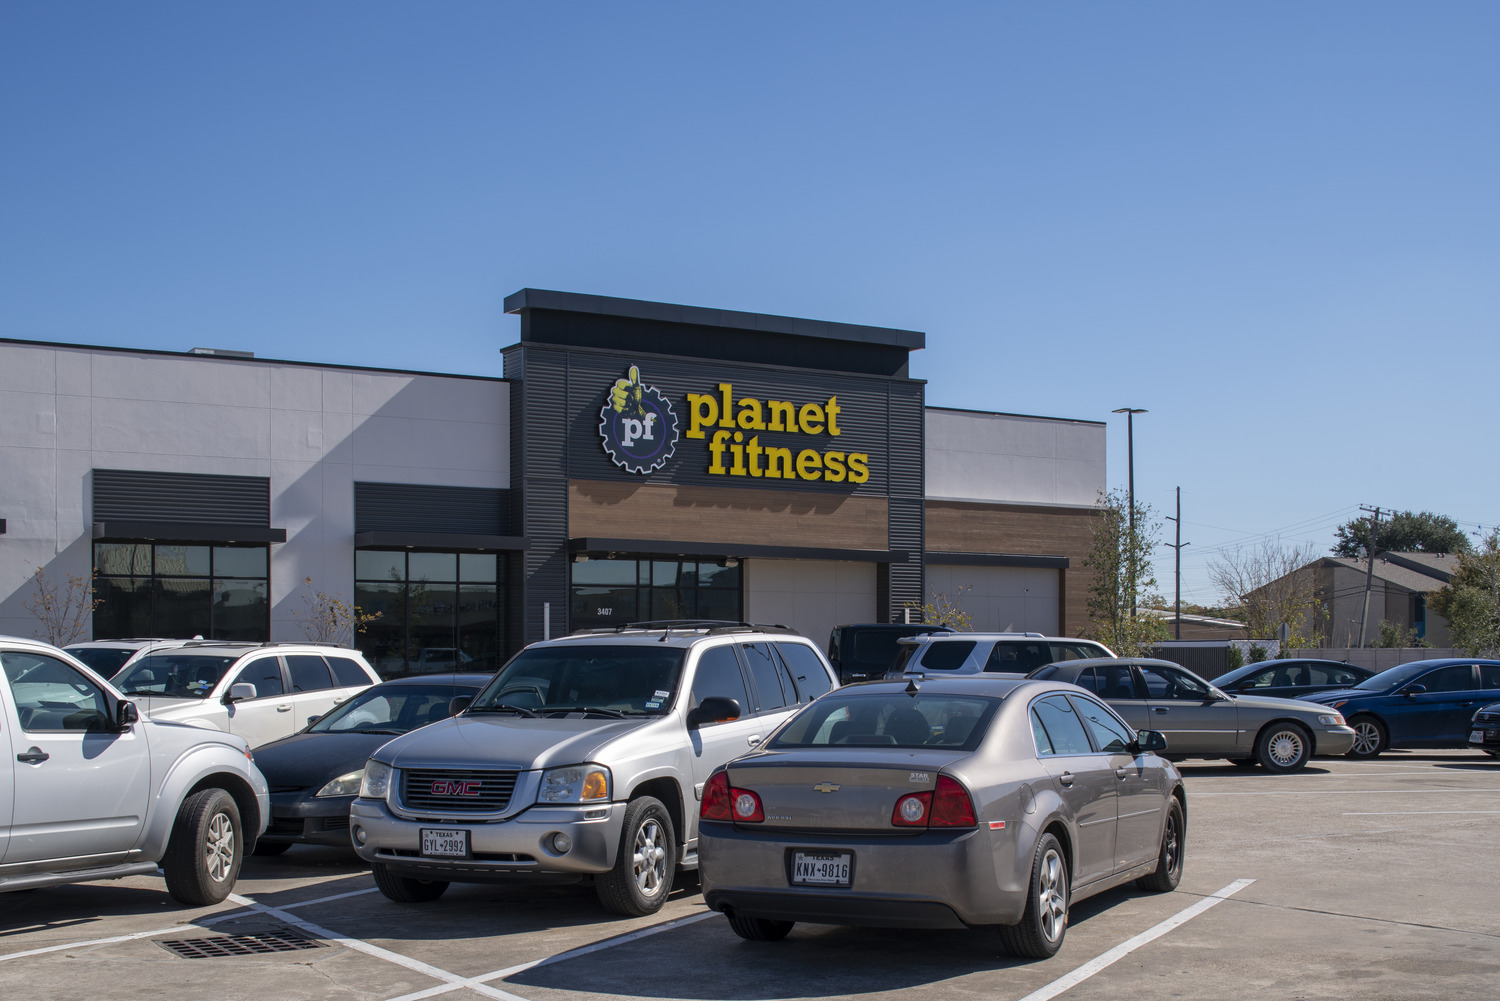 Texas City Bay Planet Fitness parking lot in Texas City TX